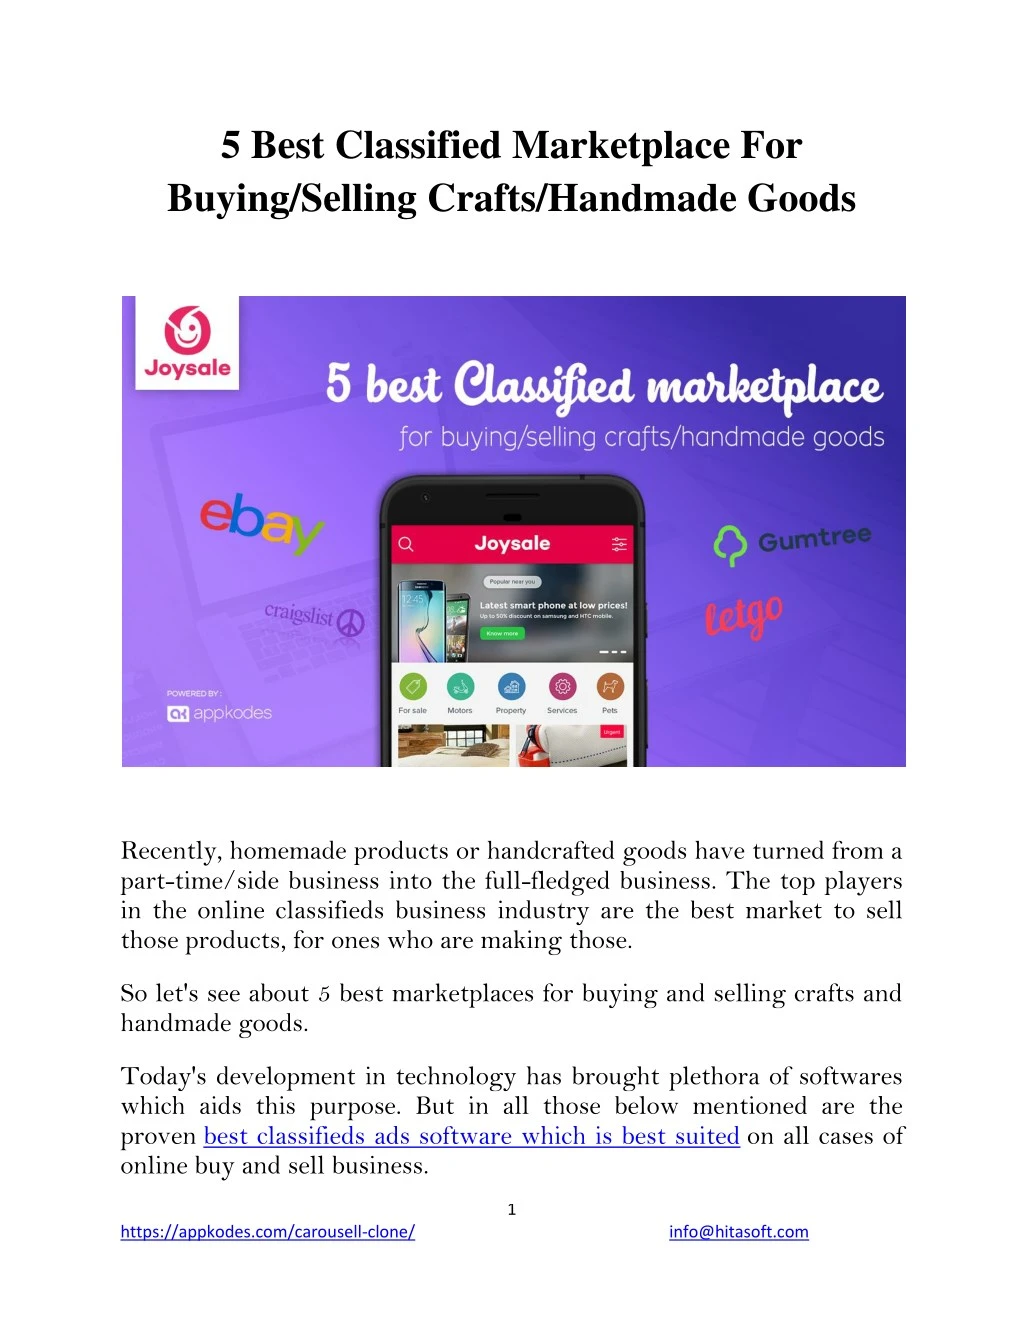 5 best classified marketplace for buying selling